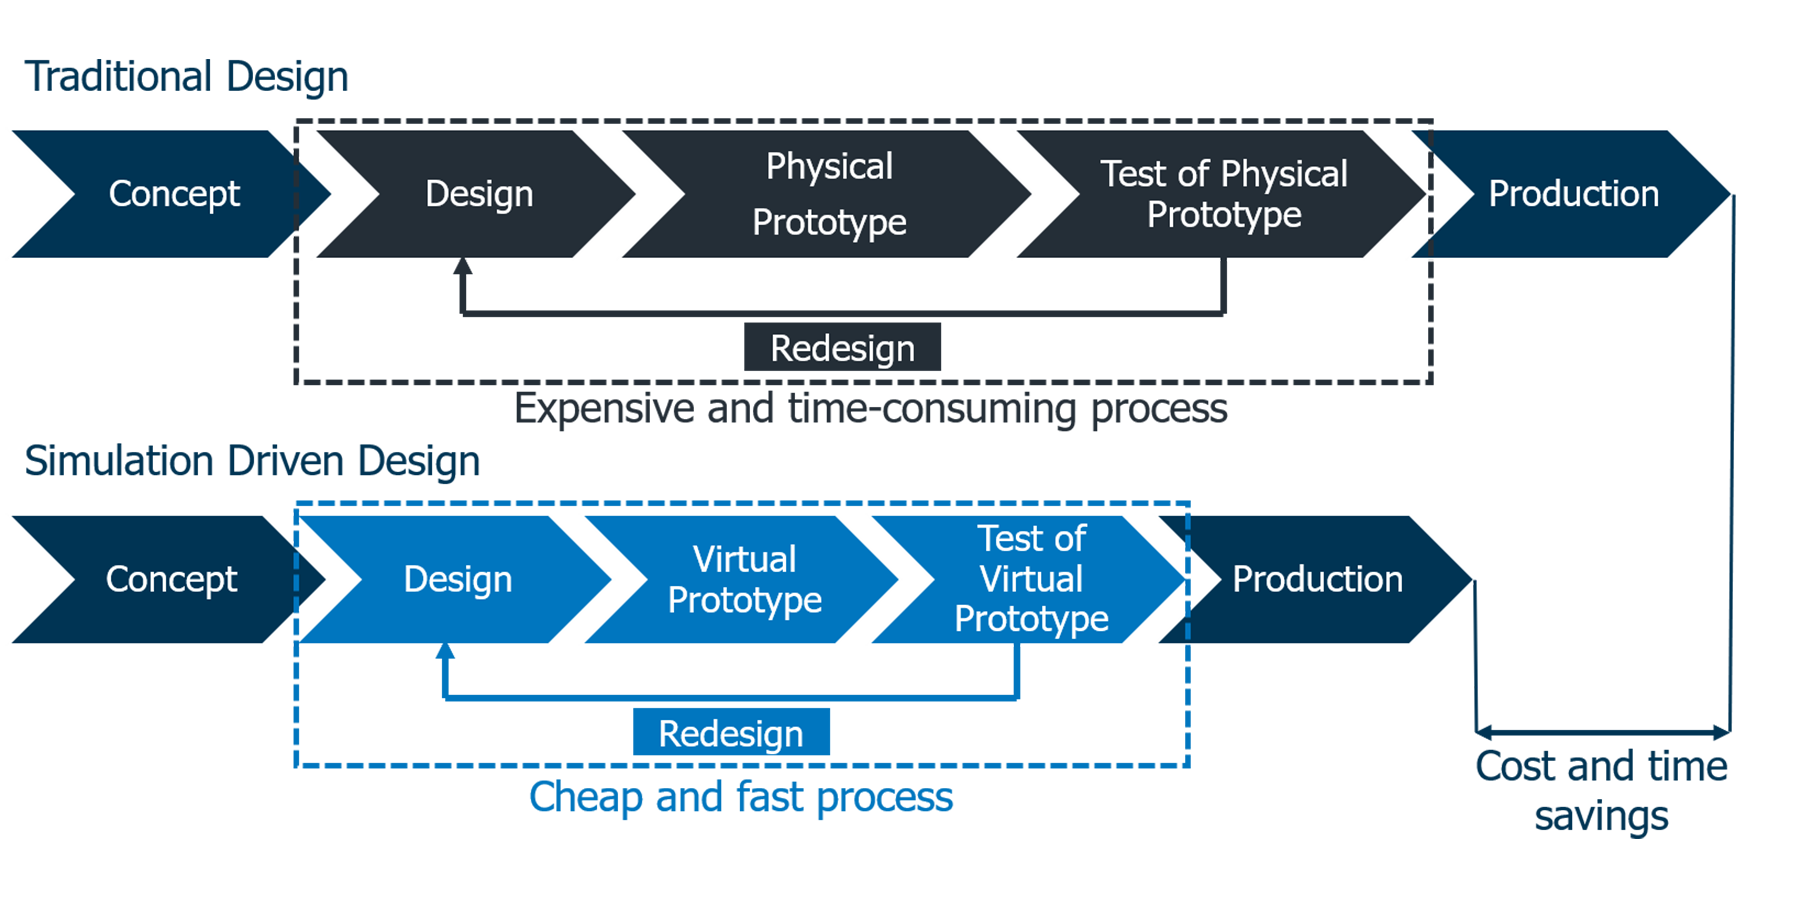 Model of traditional design and simulation driven design